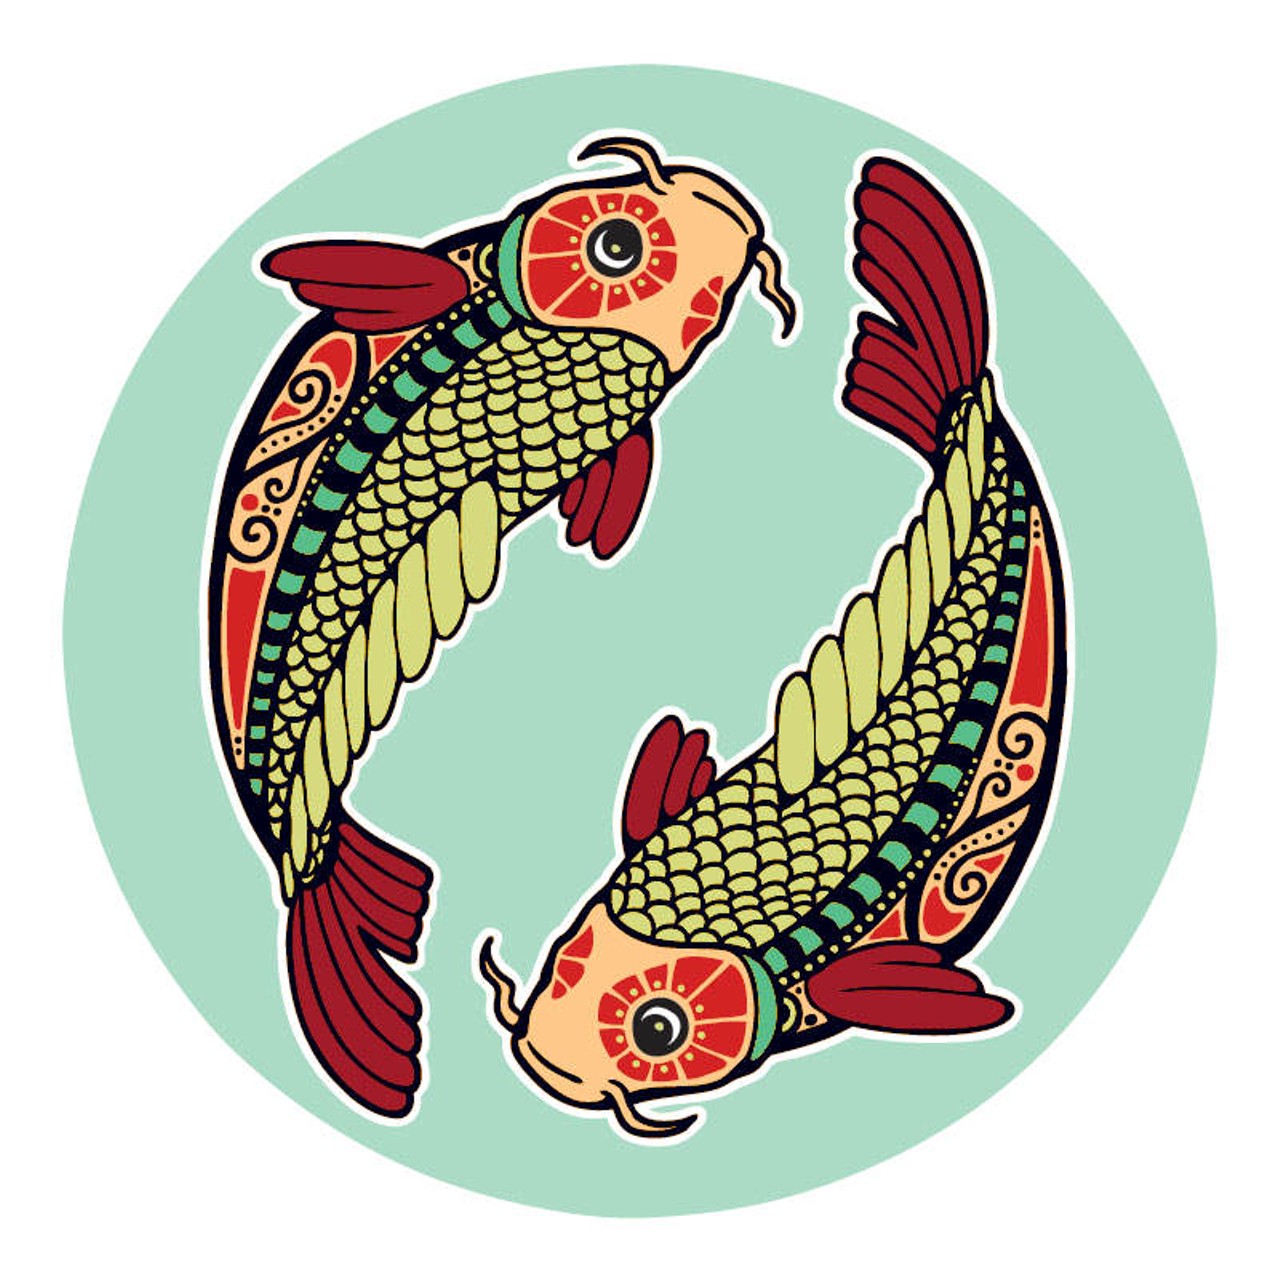 PISCES (Feb. 21-March 20): 
The sense that you have turned into a piece of Turkish Taffy is getting to you. The way you&#146;ve been getting torqued around makes me wonder if you will make it through this. Too much is in the forefront for you to know which priority is which. To top it all off you&#146;ve got more than your share of opportunities on tap &#151; and it&#146;s making you wish you could just drop everything and do your thing. Be patient. Your wish is always the universe&#146;s command, but first things first. There are too many things that need tidying up. All of them are here to pave your way &#151; take one at a time.